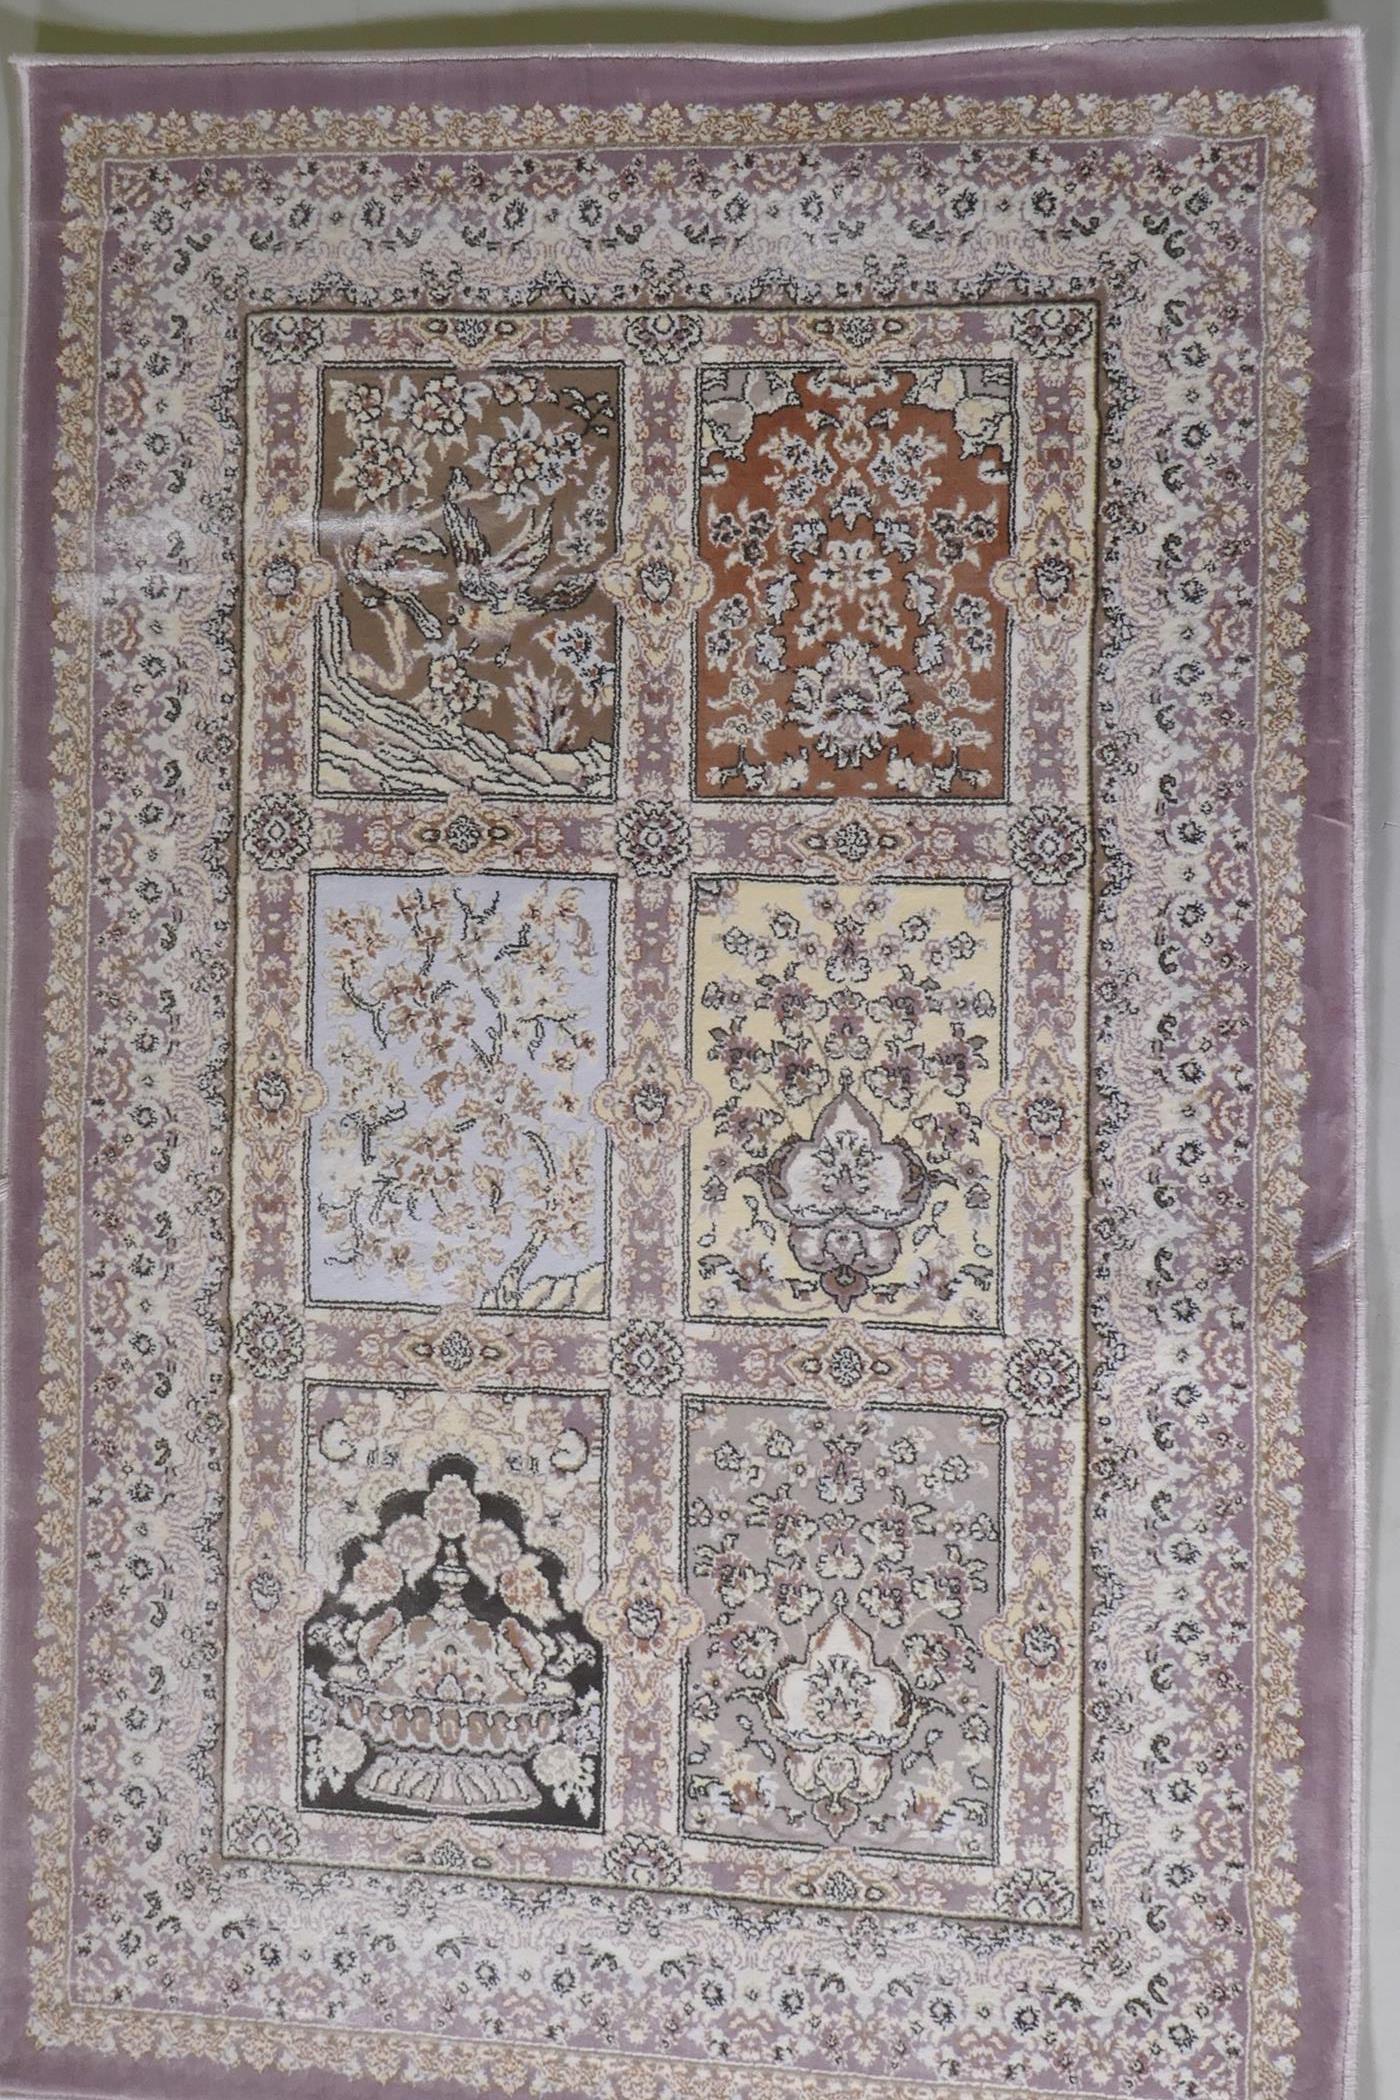 A pair of fine woven bamboo silk rugs with traditional Persian panel designs on a lilac coloured - Image 3 of 5